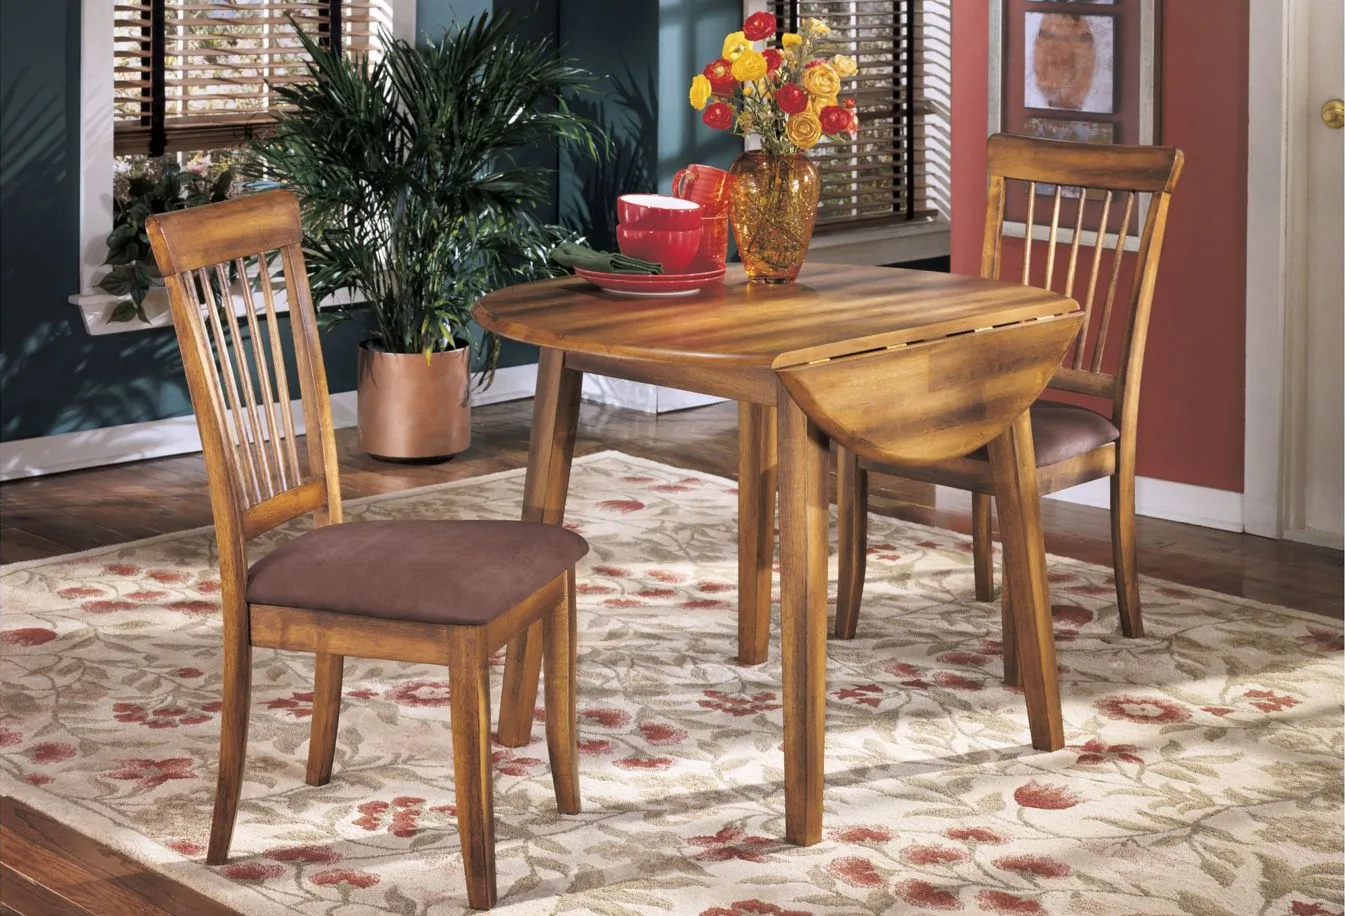 Berringer 3-pc. Dining Set in Rustic Brown by Ashley Furniture